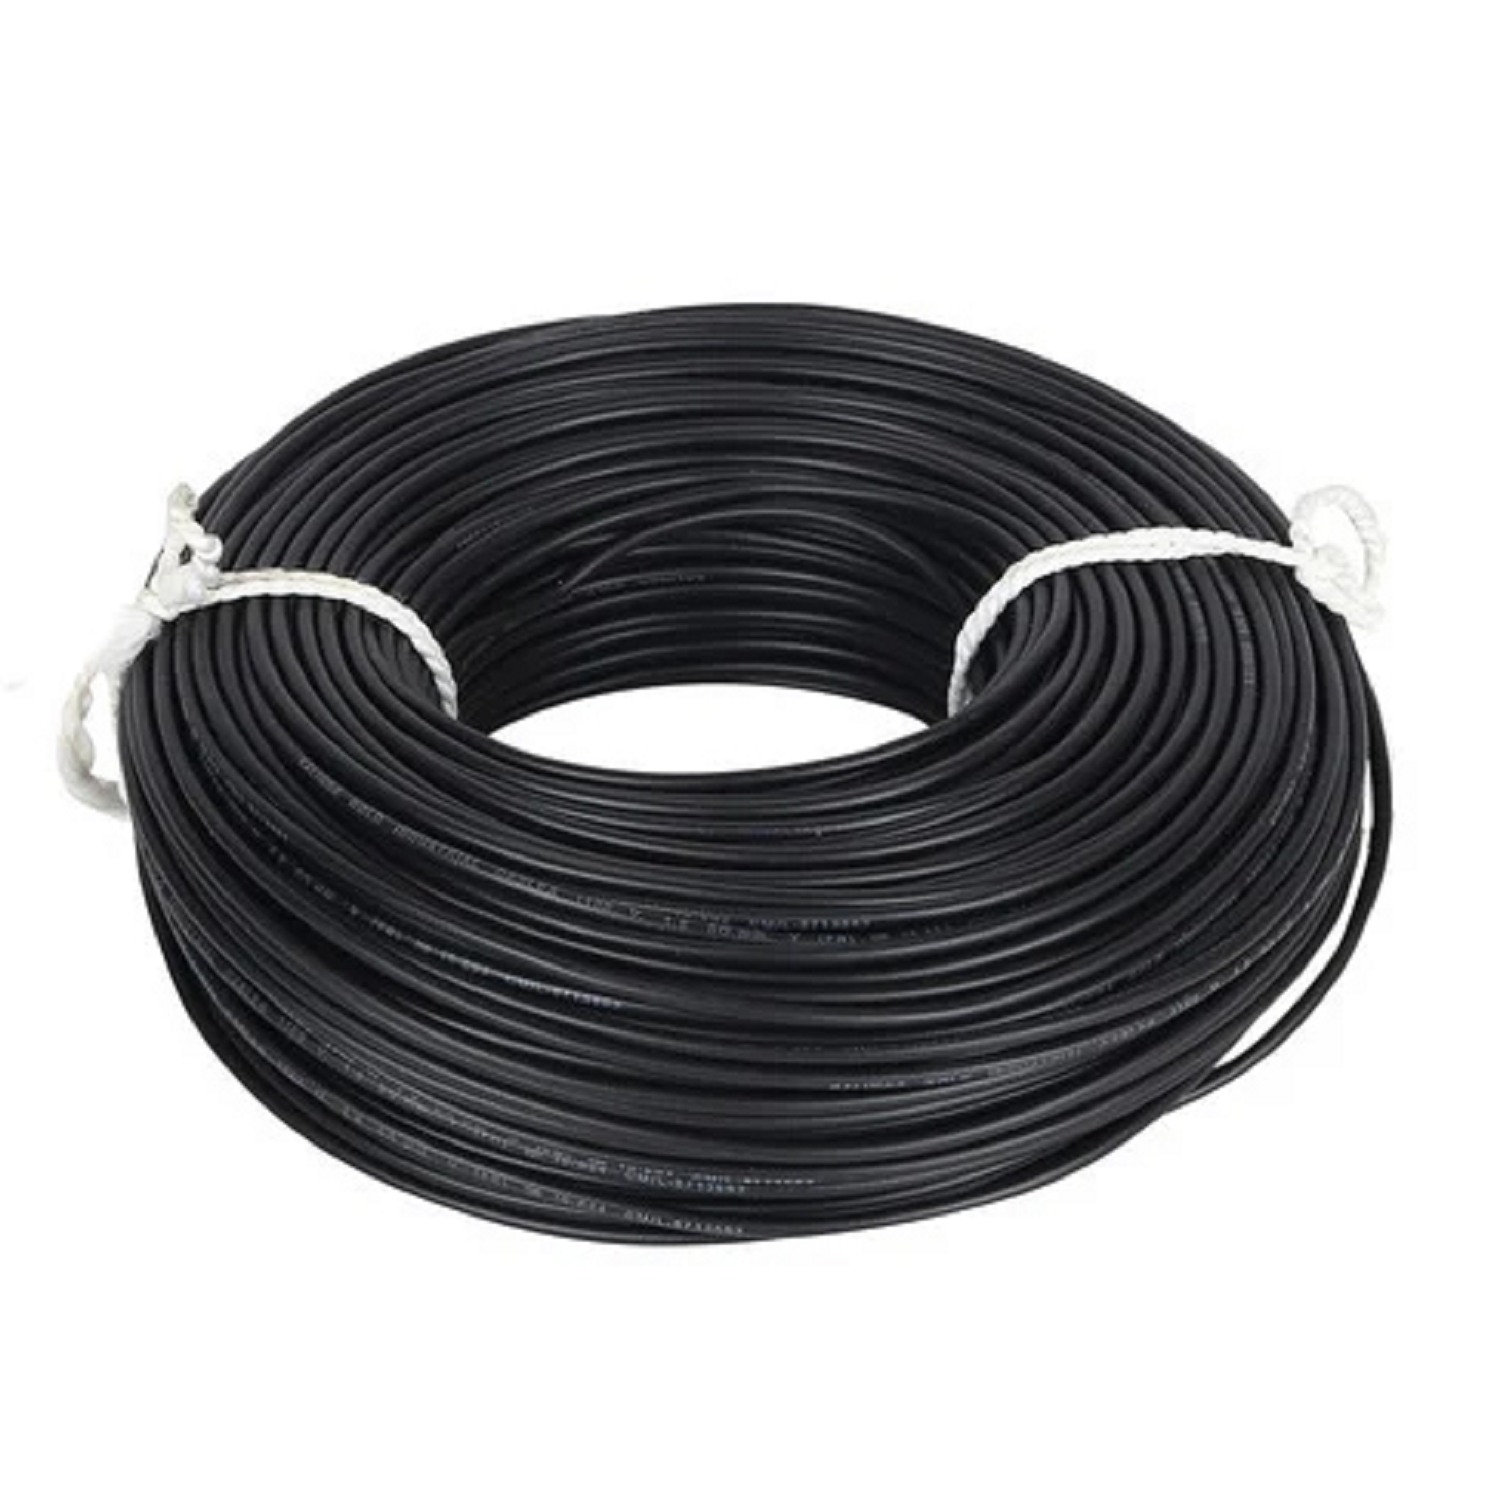 2.5 Sqmm KEI FR Single Core Copper Wire (180 Mtr) With PVC Insulated for Domestic 38 Industrial Uses